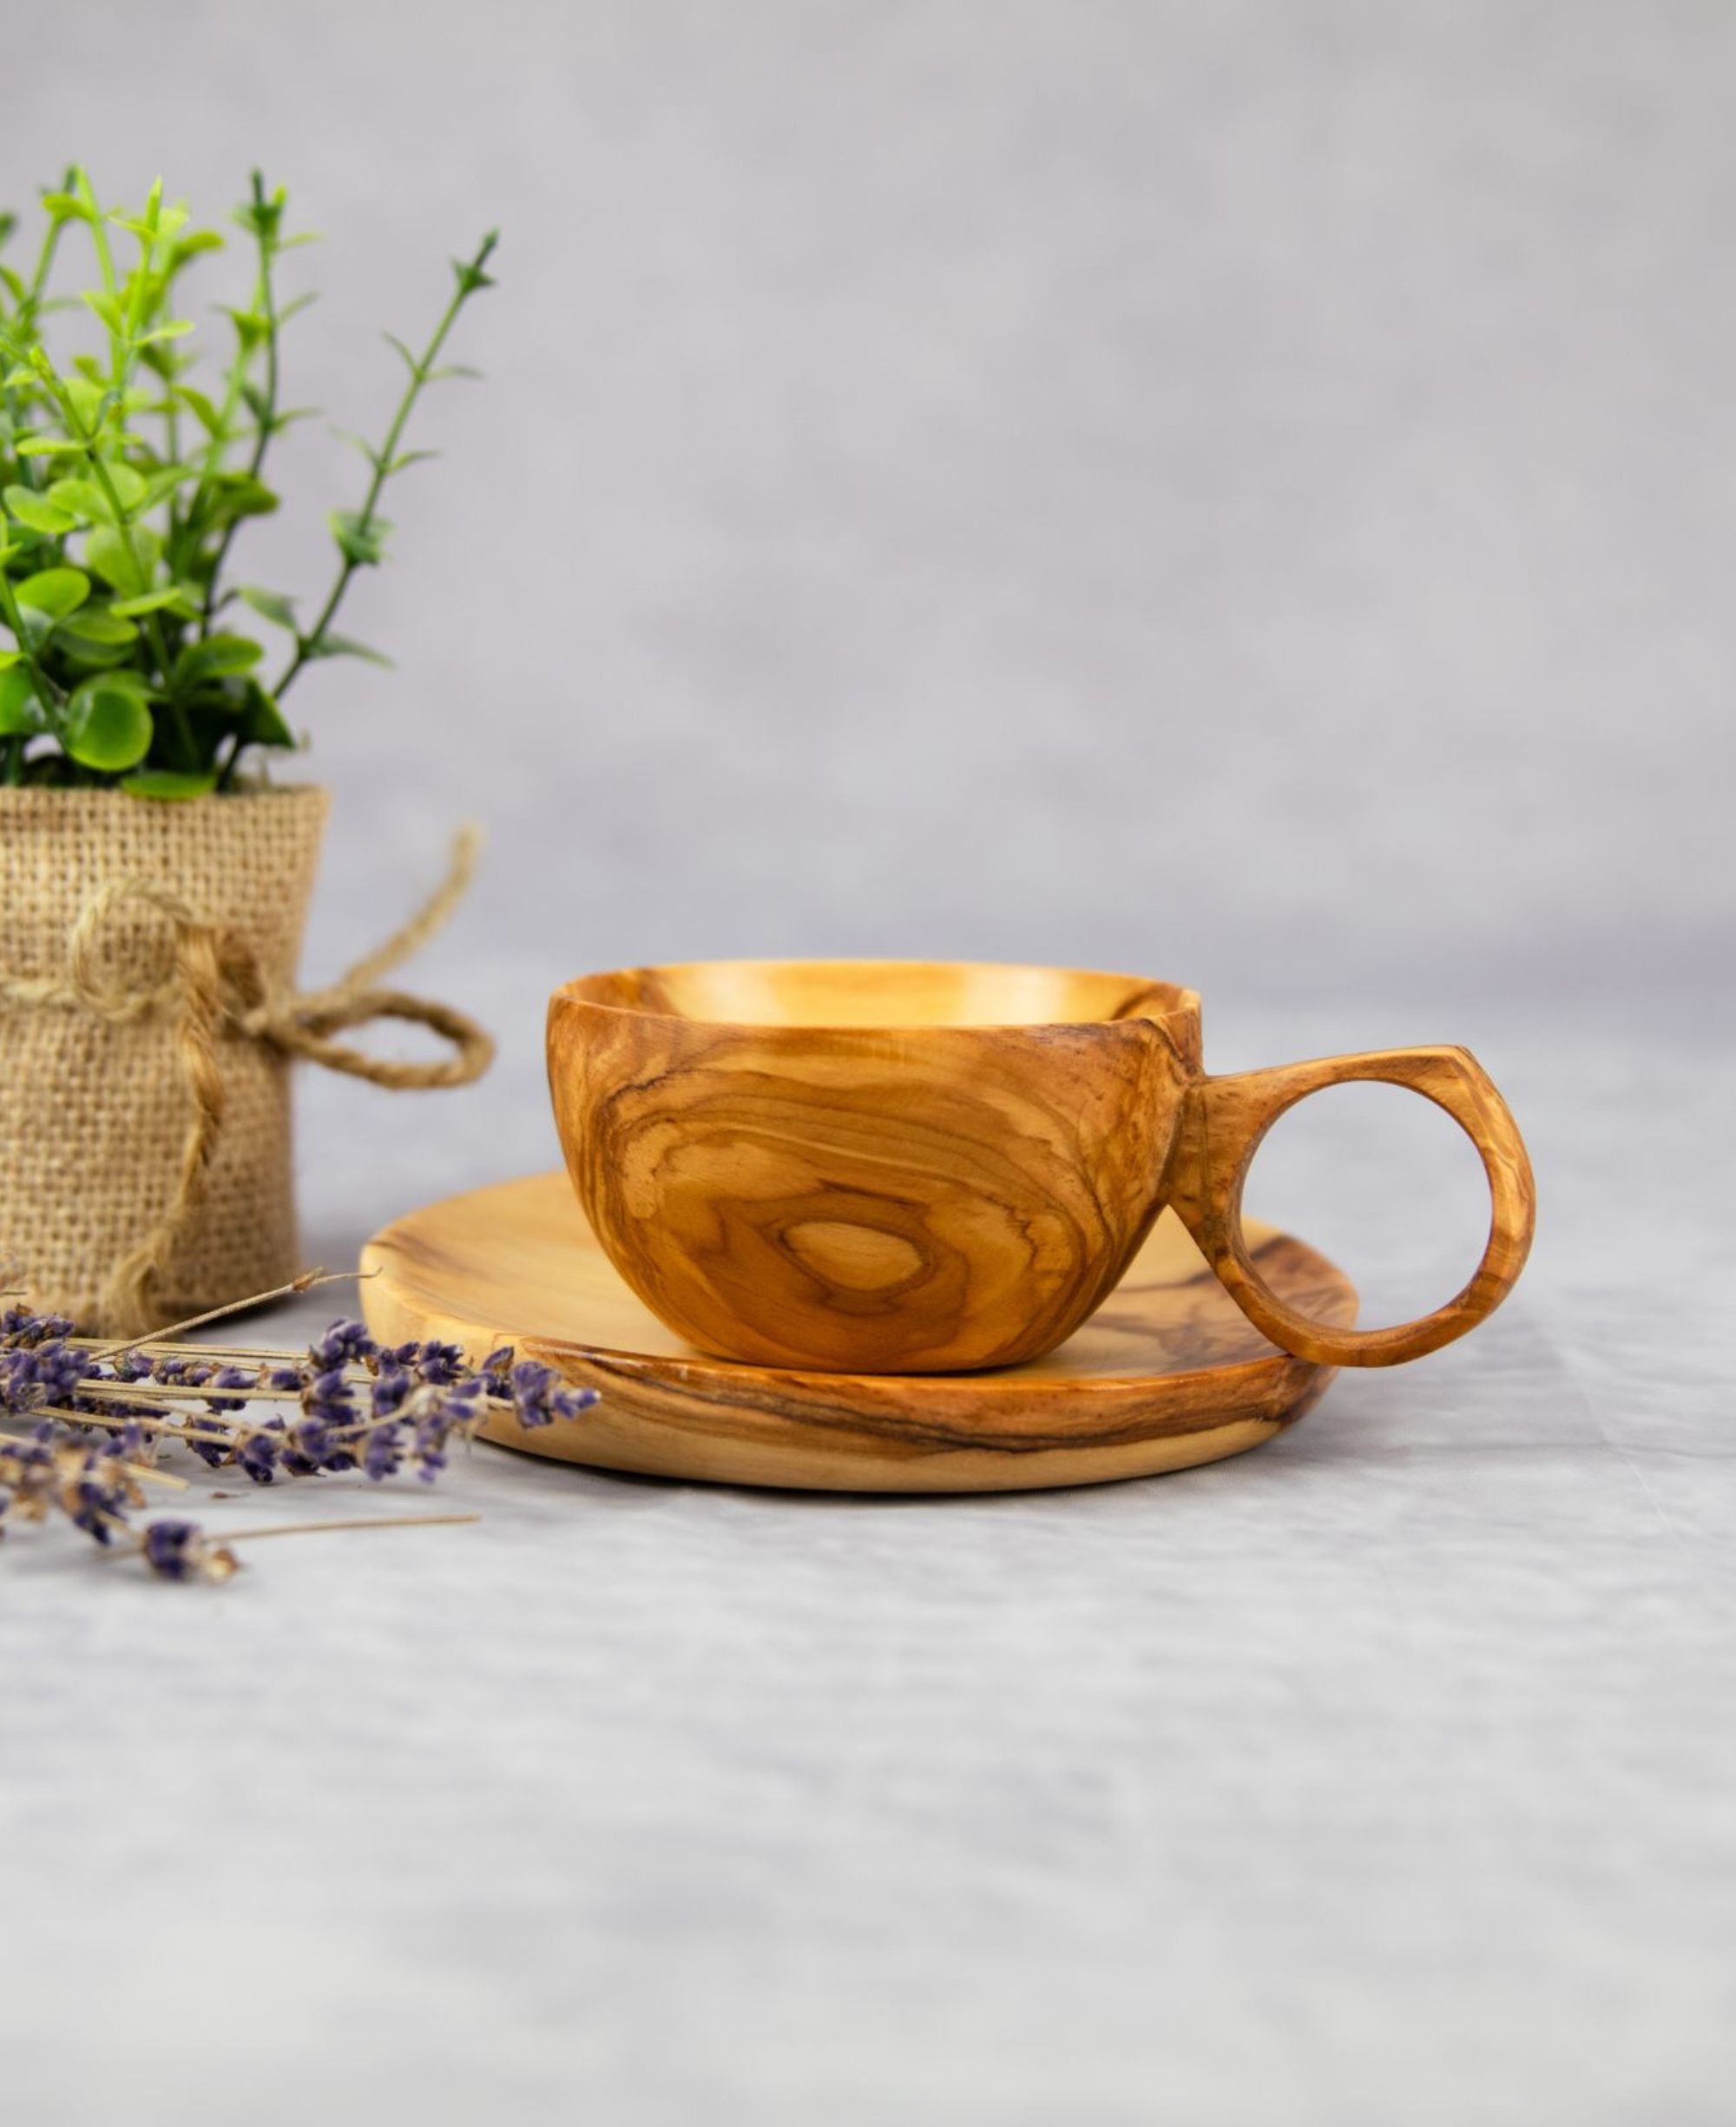 Thuya Wood Coffee Cup and Saucer Set - Wooden Coffee Cup Minimalist Kitchen